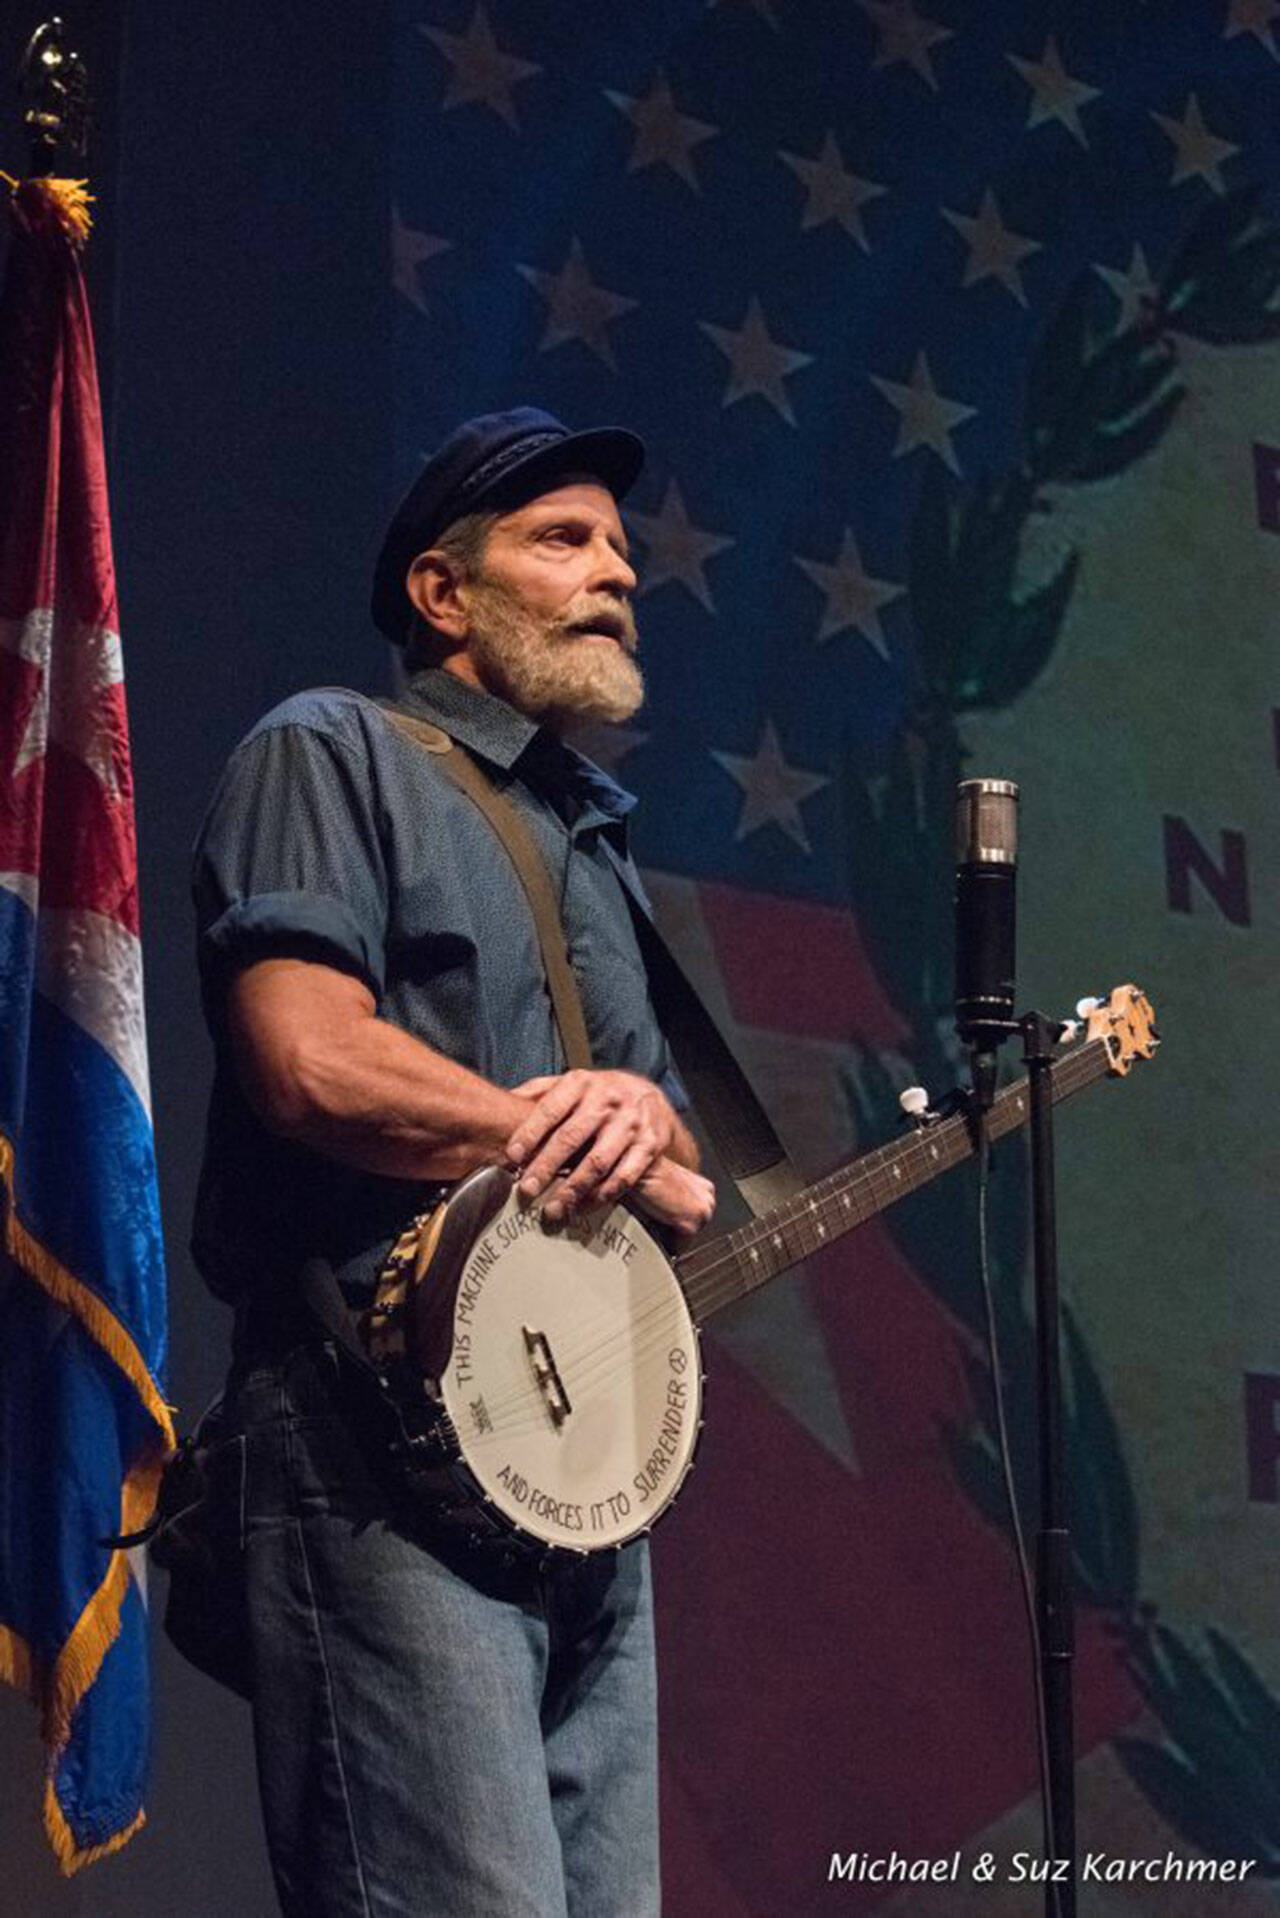 (Michael & Suz Carter Photo) Actor, writer, and director Randy Noojin will perform his one-person show about Pete Seeger at Open Space for Arts & Community in the last two weeks of July.